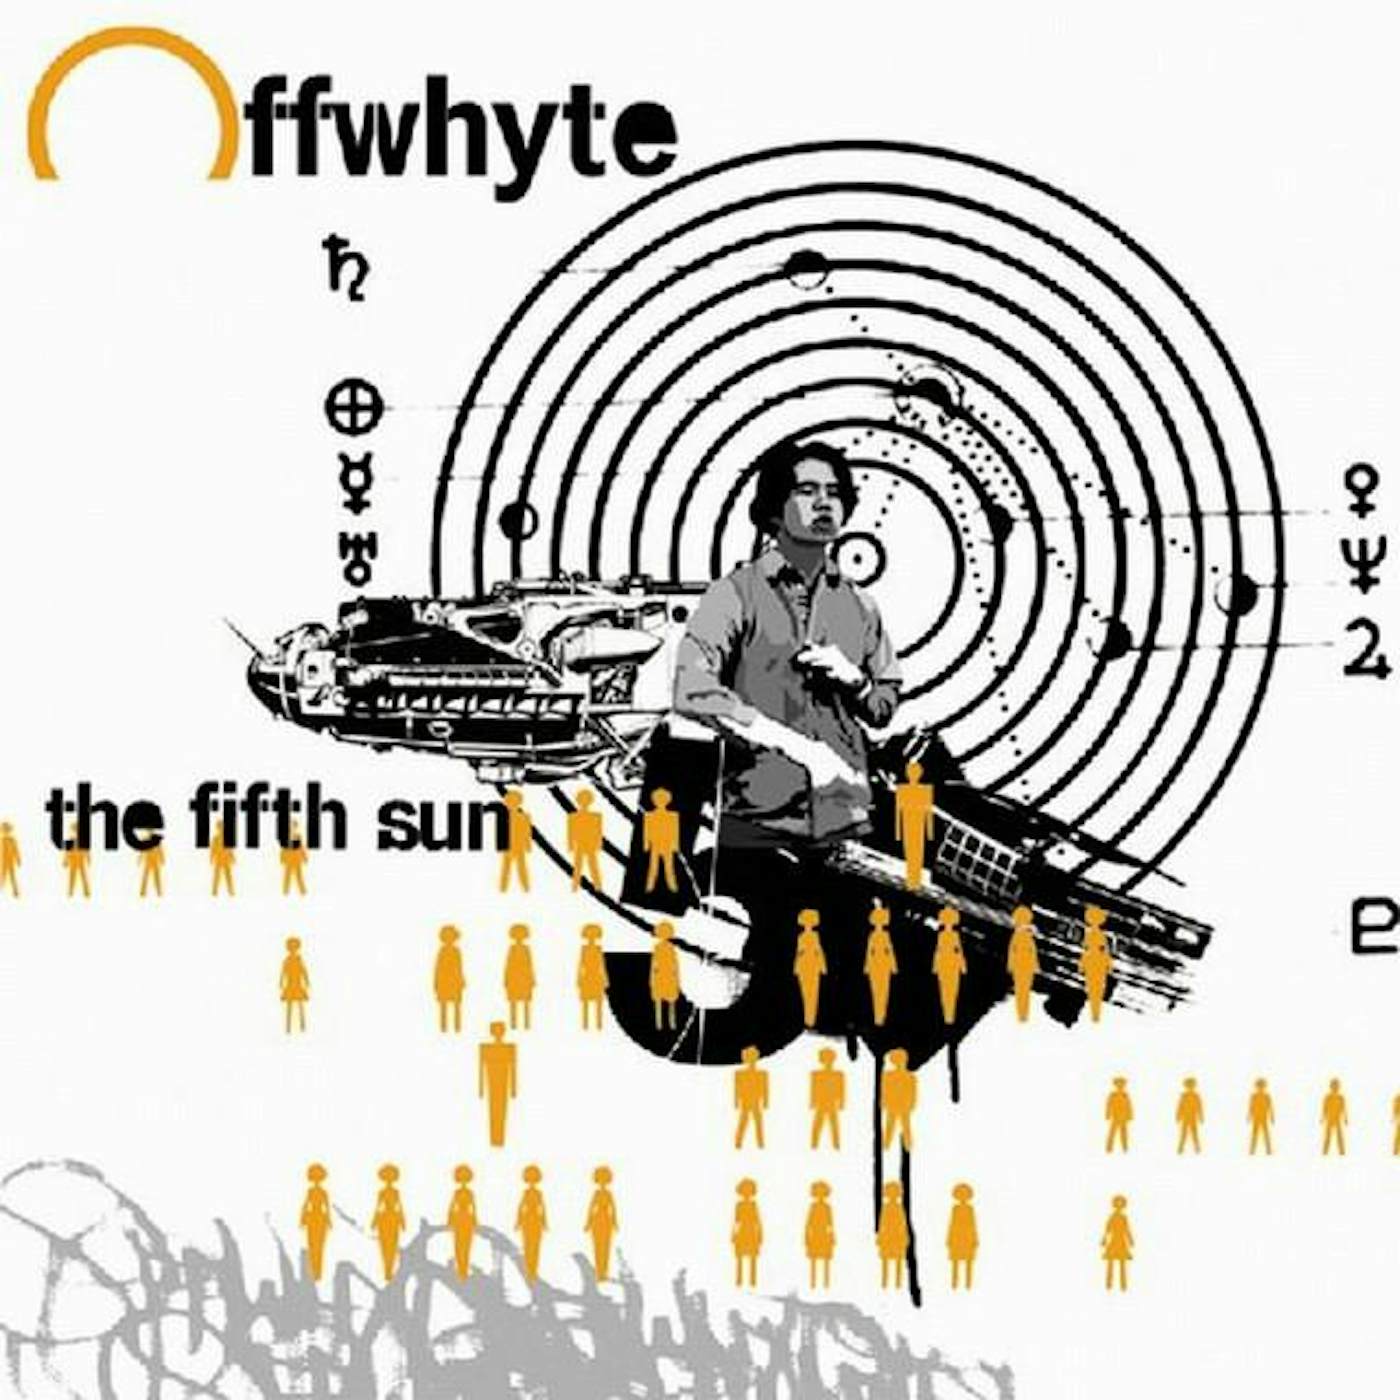 Offwhyte